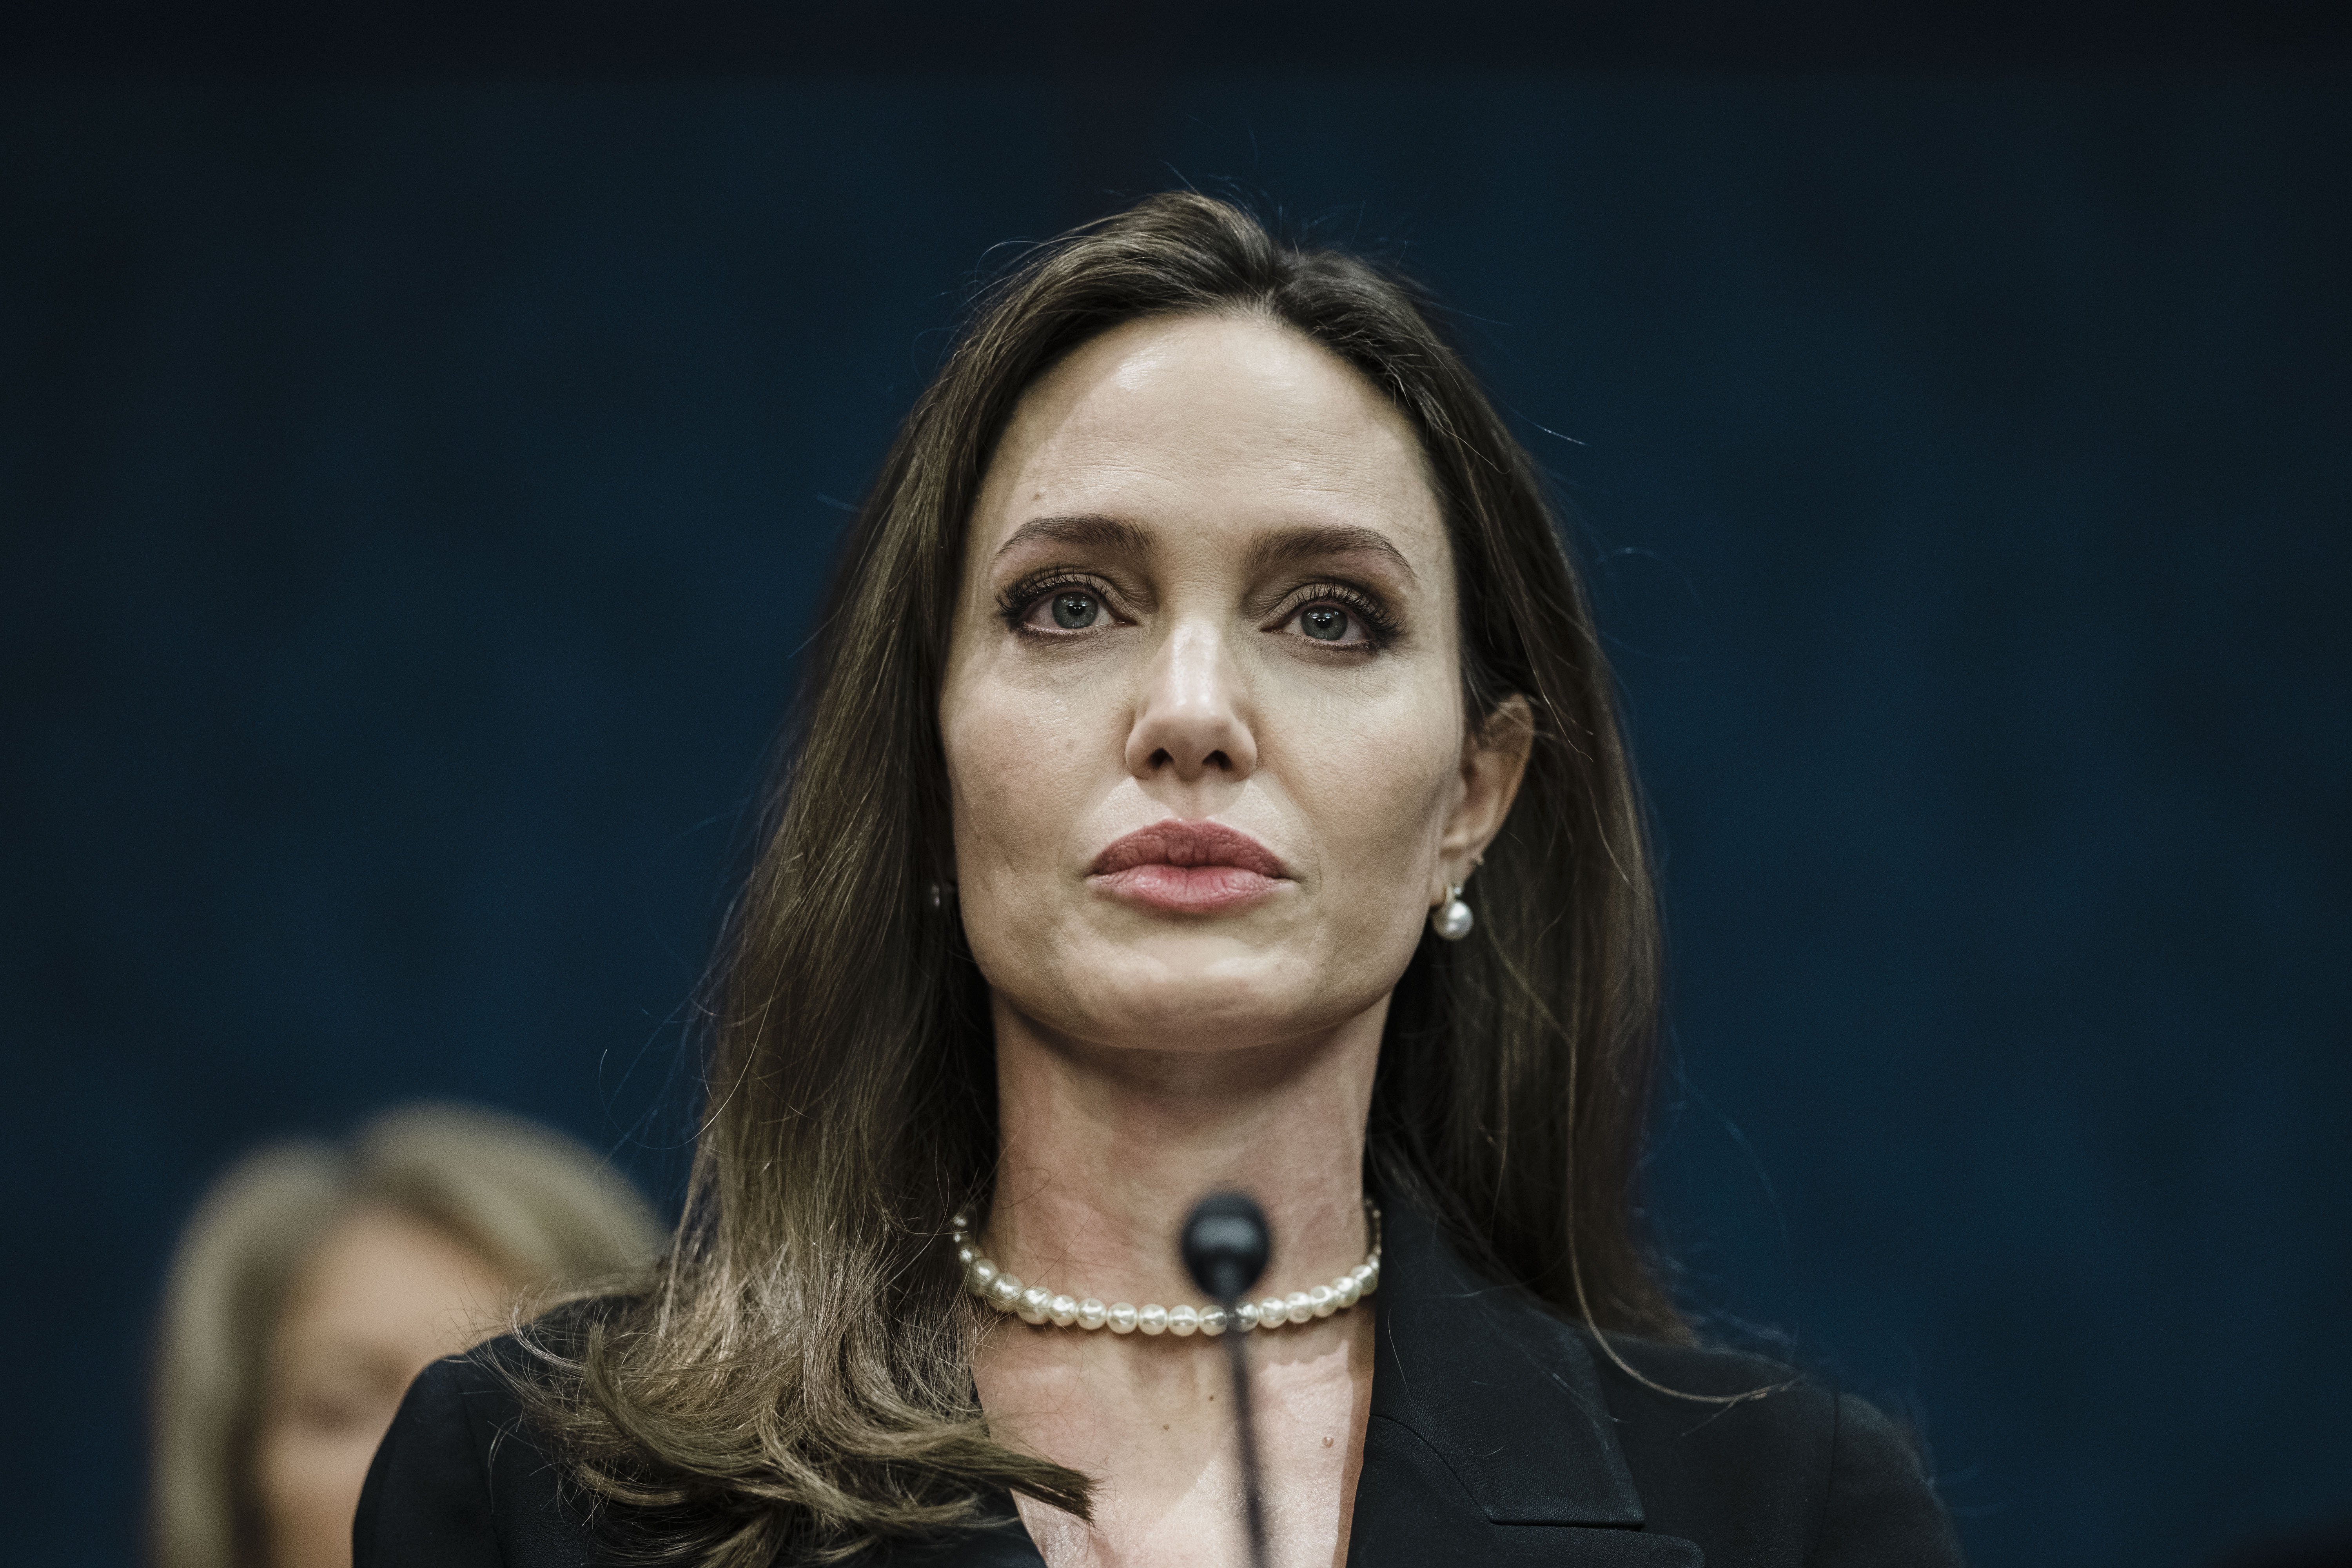 Angelina Jolie speaks during a news conference on the bipartisan modernized Violence Against Women Act (VAWA) on Capitol Hill in Washington, DC on February 9, 2022. | Source: Getty Images